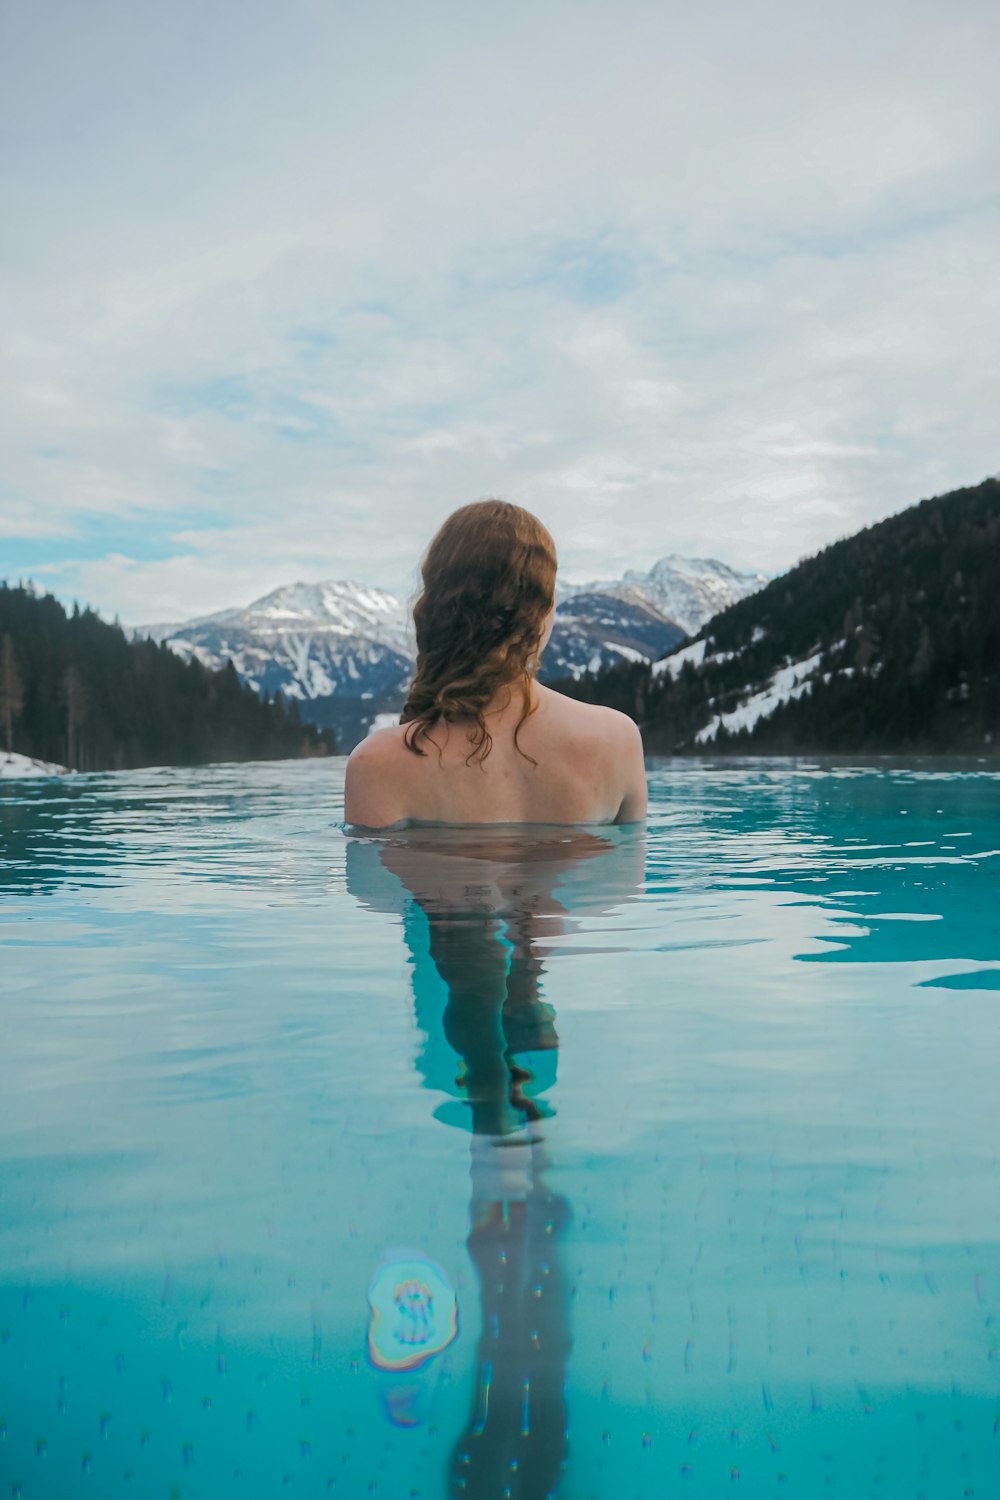 a woman sitting in a pool of water with mountains in the background